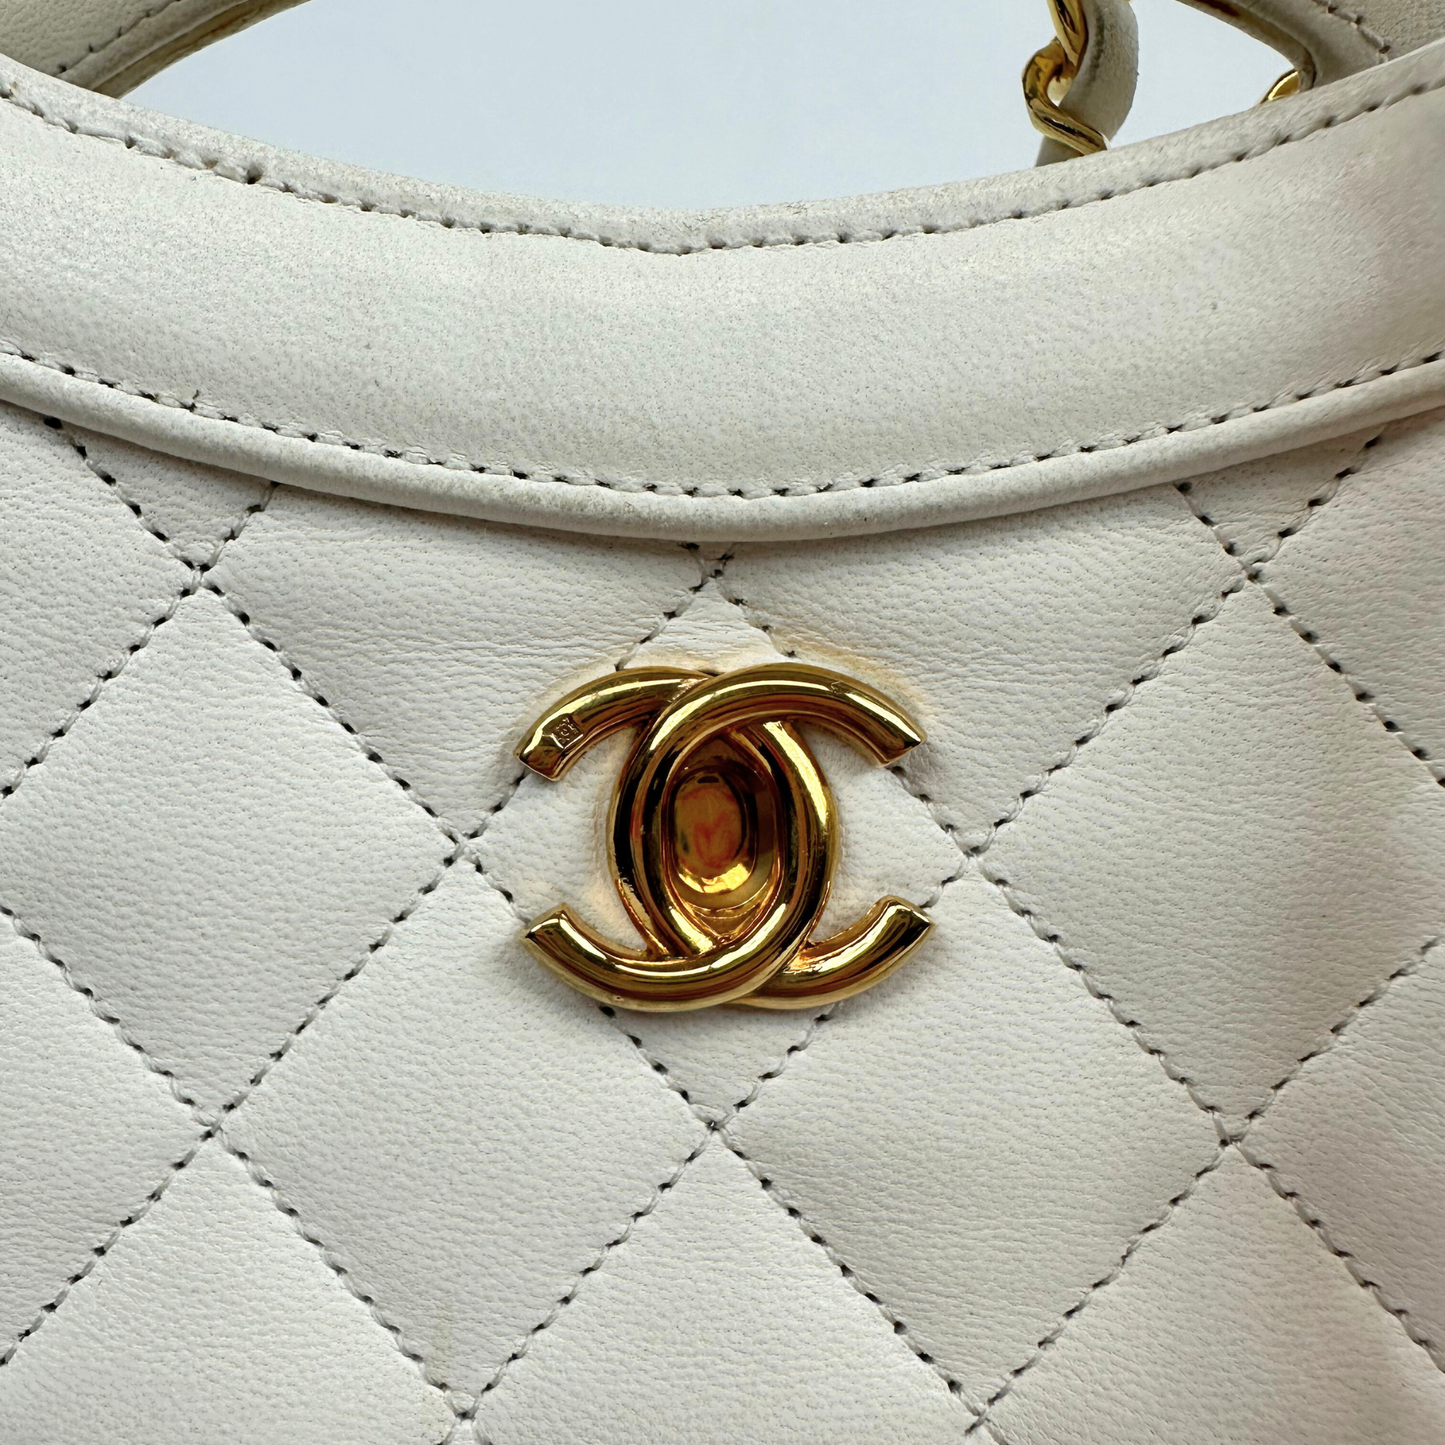 CHANEL White Diamond-Quilted CC Two-Way Bag